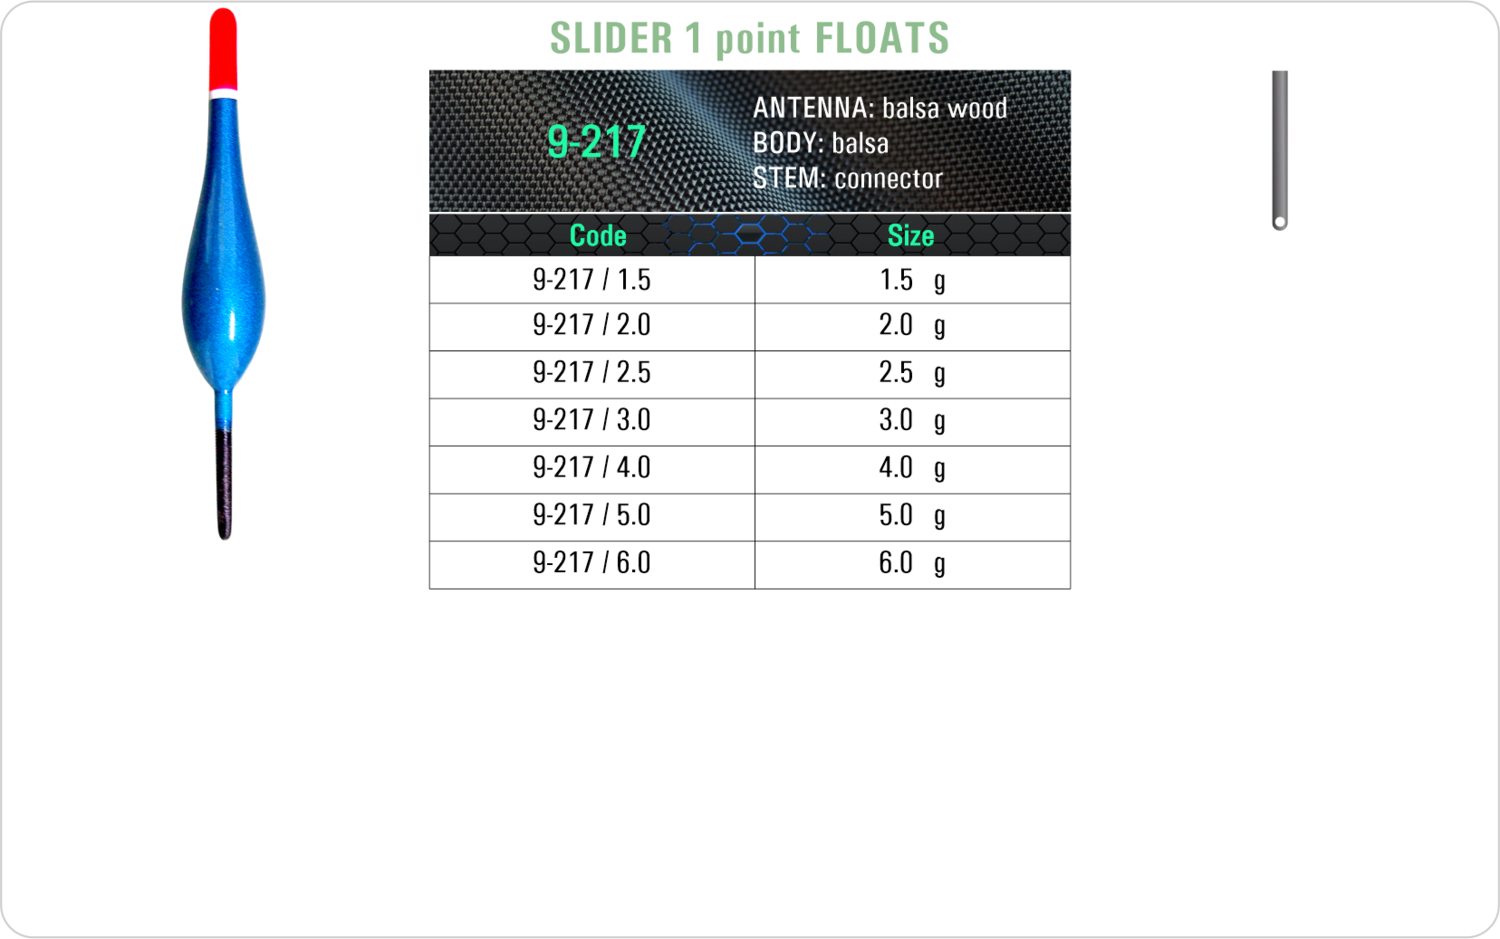 SF 9-217 - Lake and river float model and table containing an additional information about this float with different codes, sizes, types of the body, the stem and the antenna of the float.